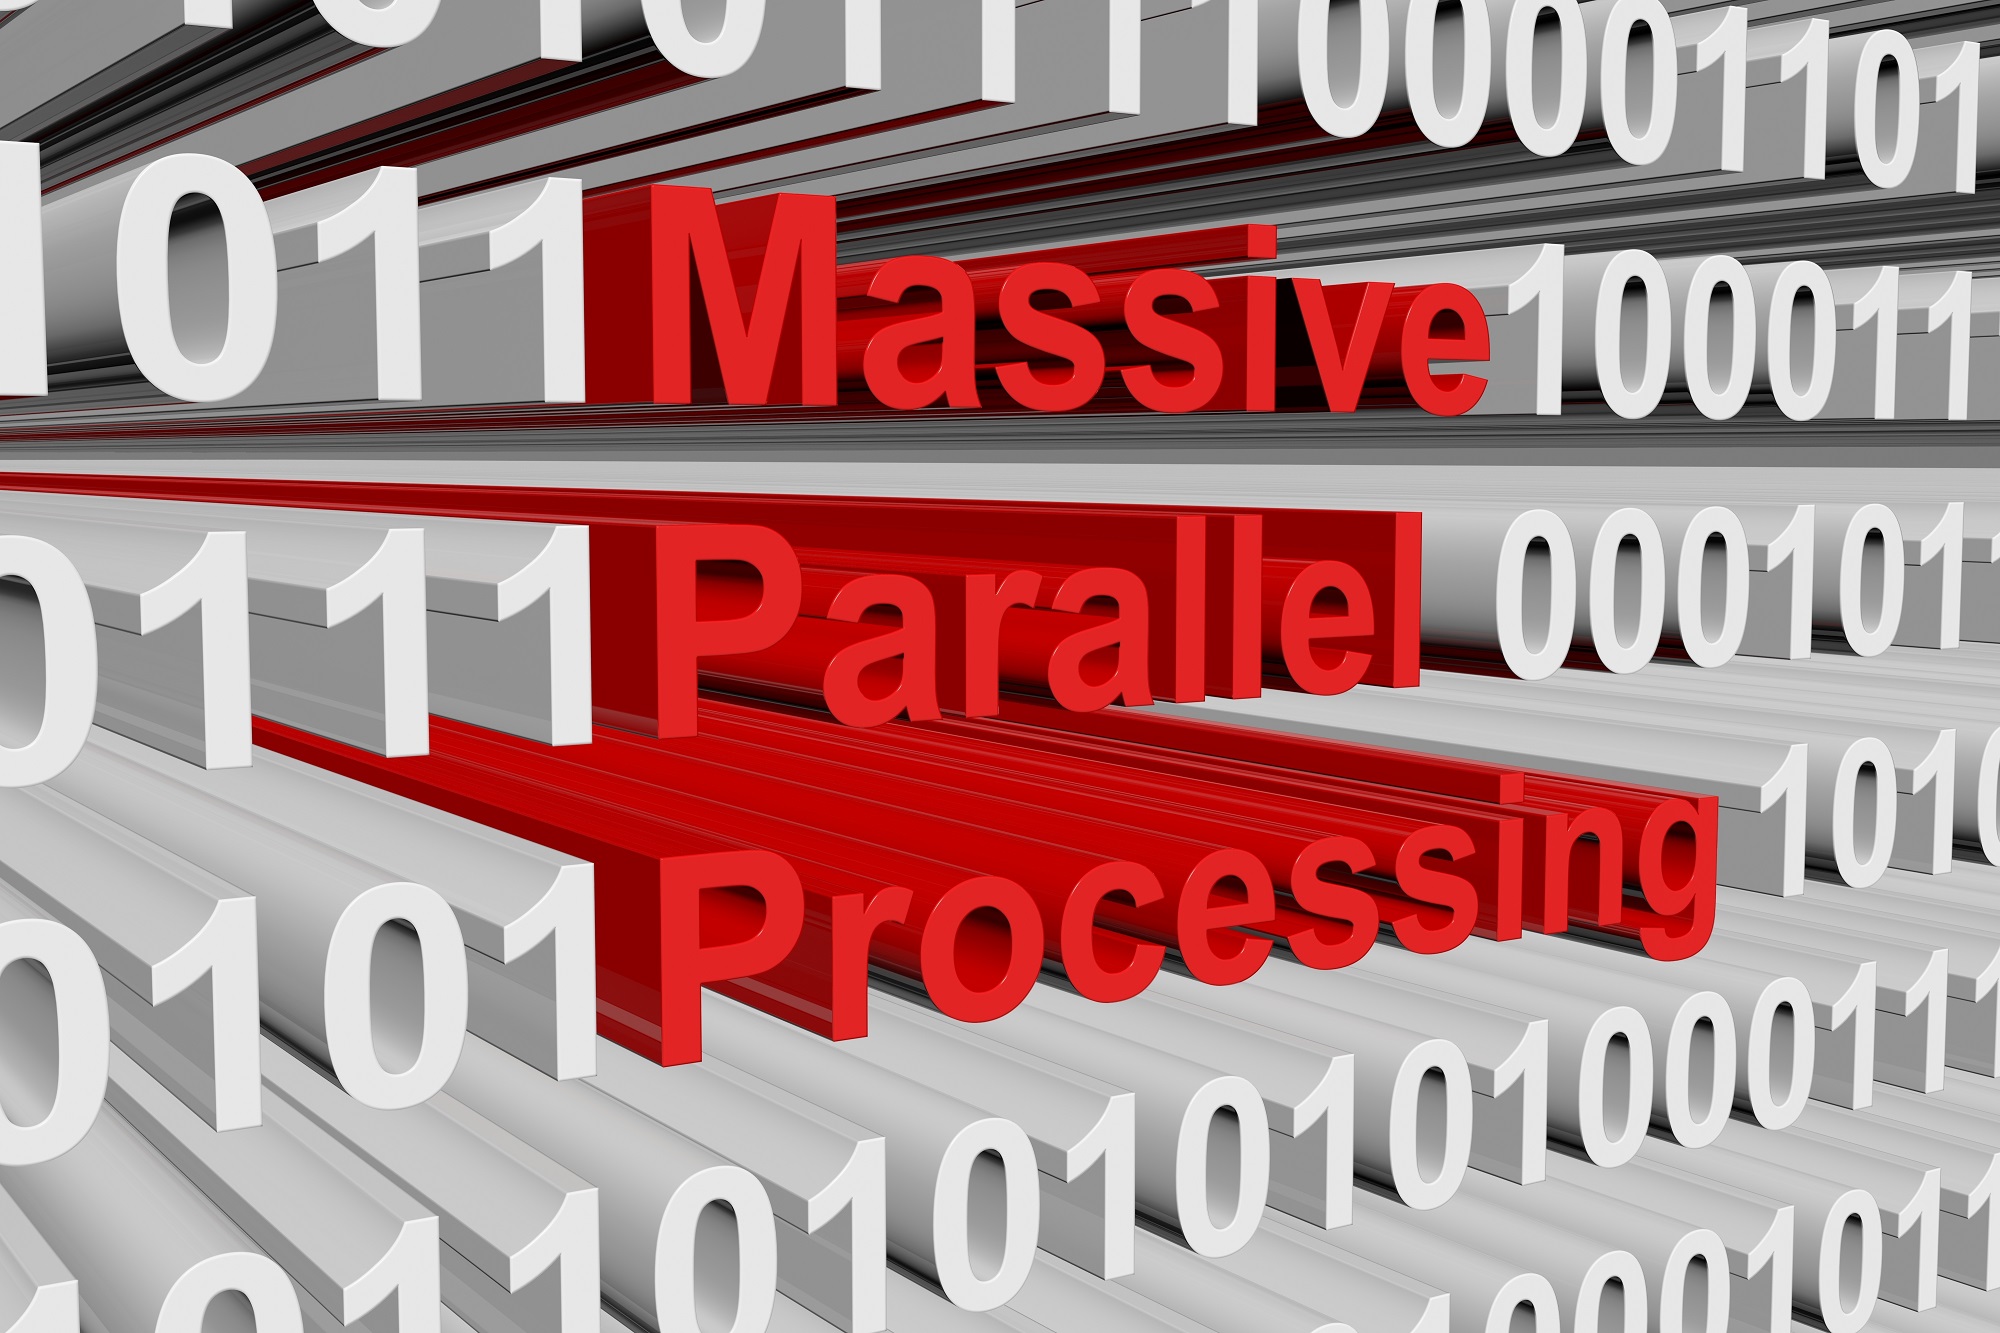 Massive,Parallel,Processing,In,The,Form,Of,Binary,Code,,3d